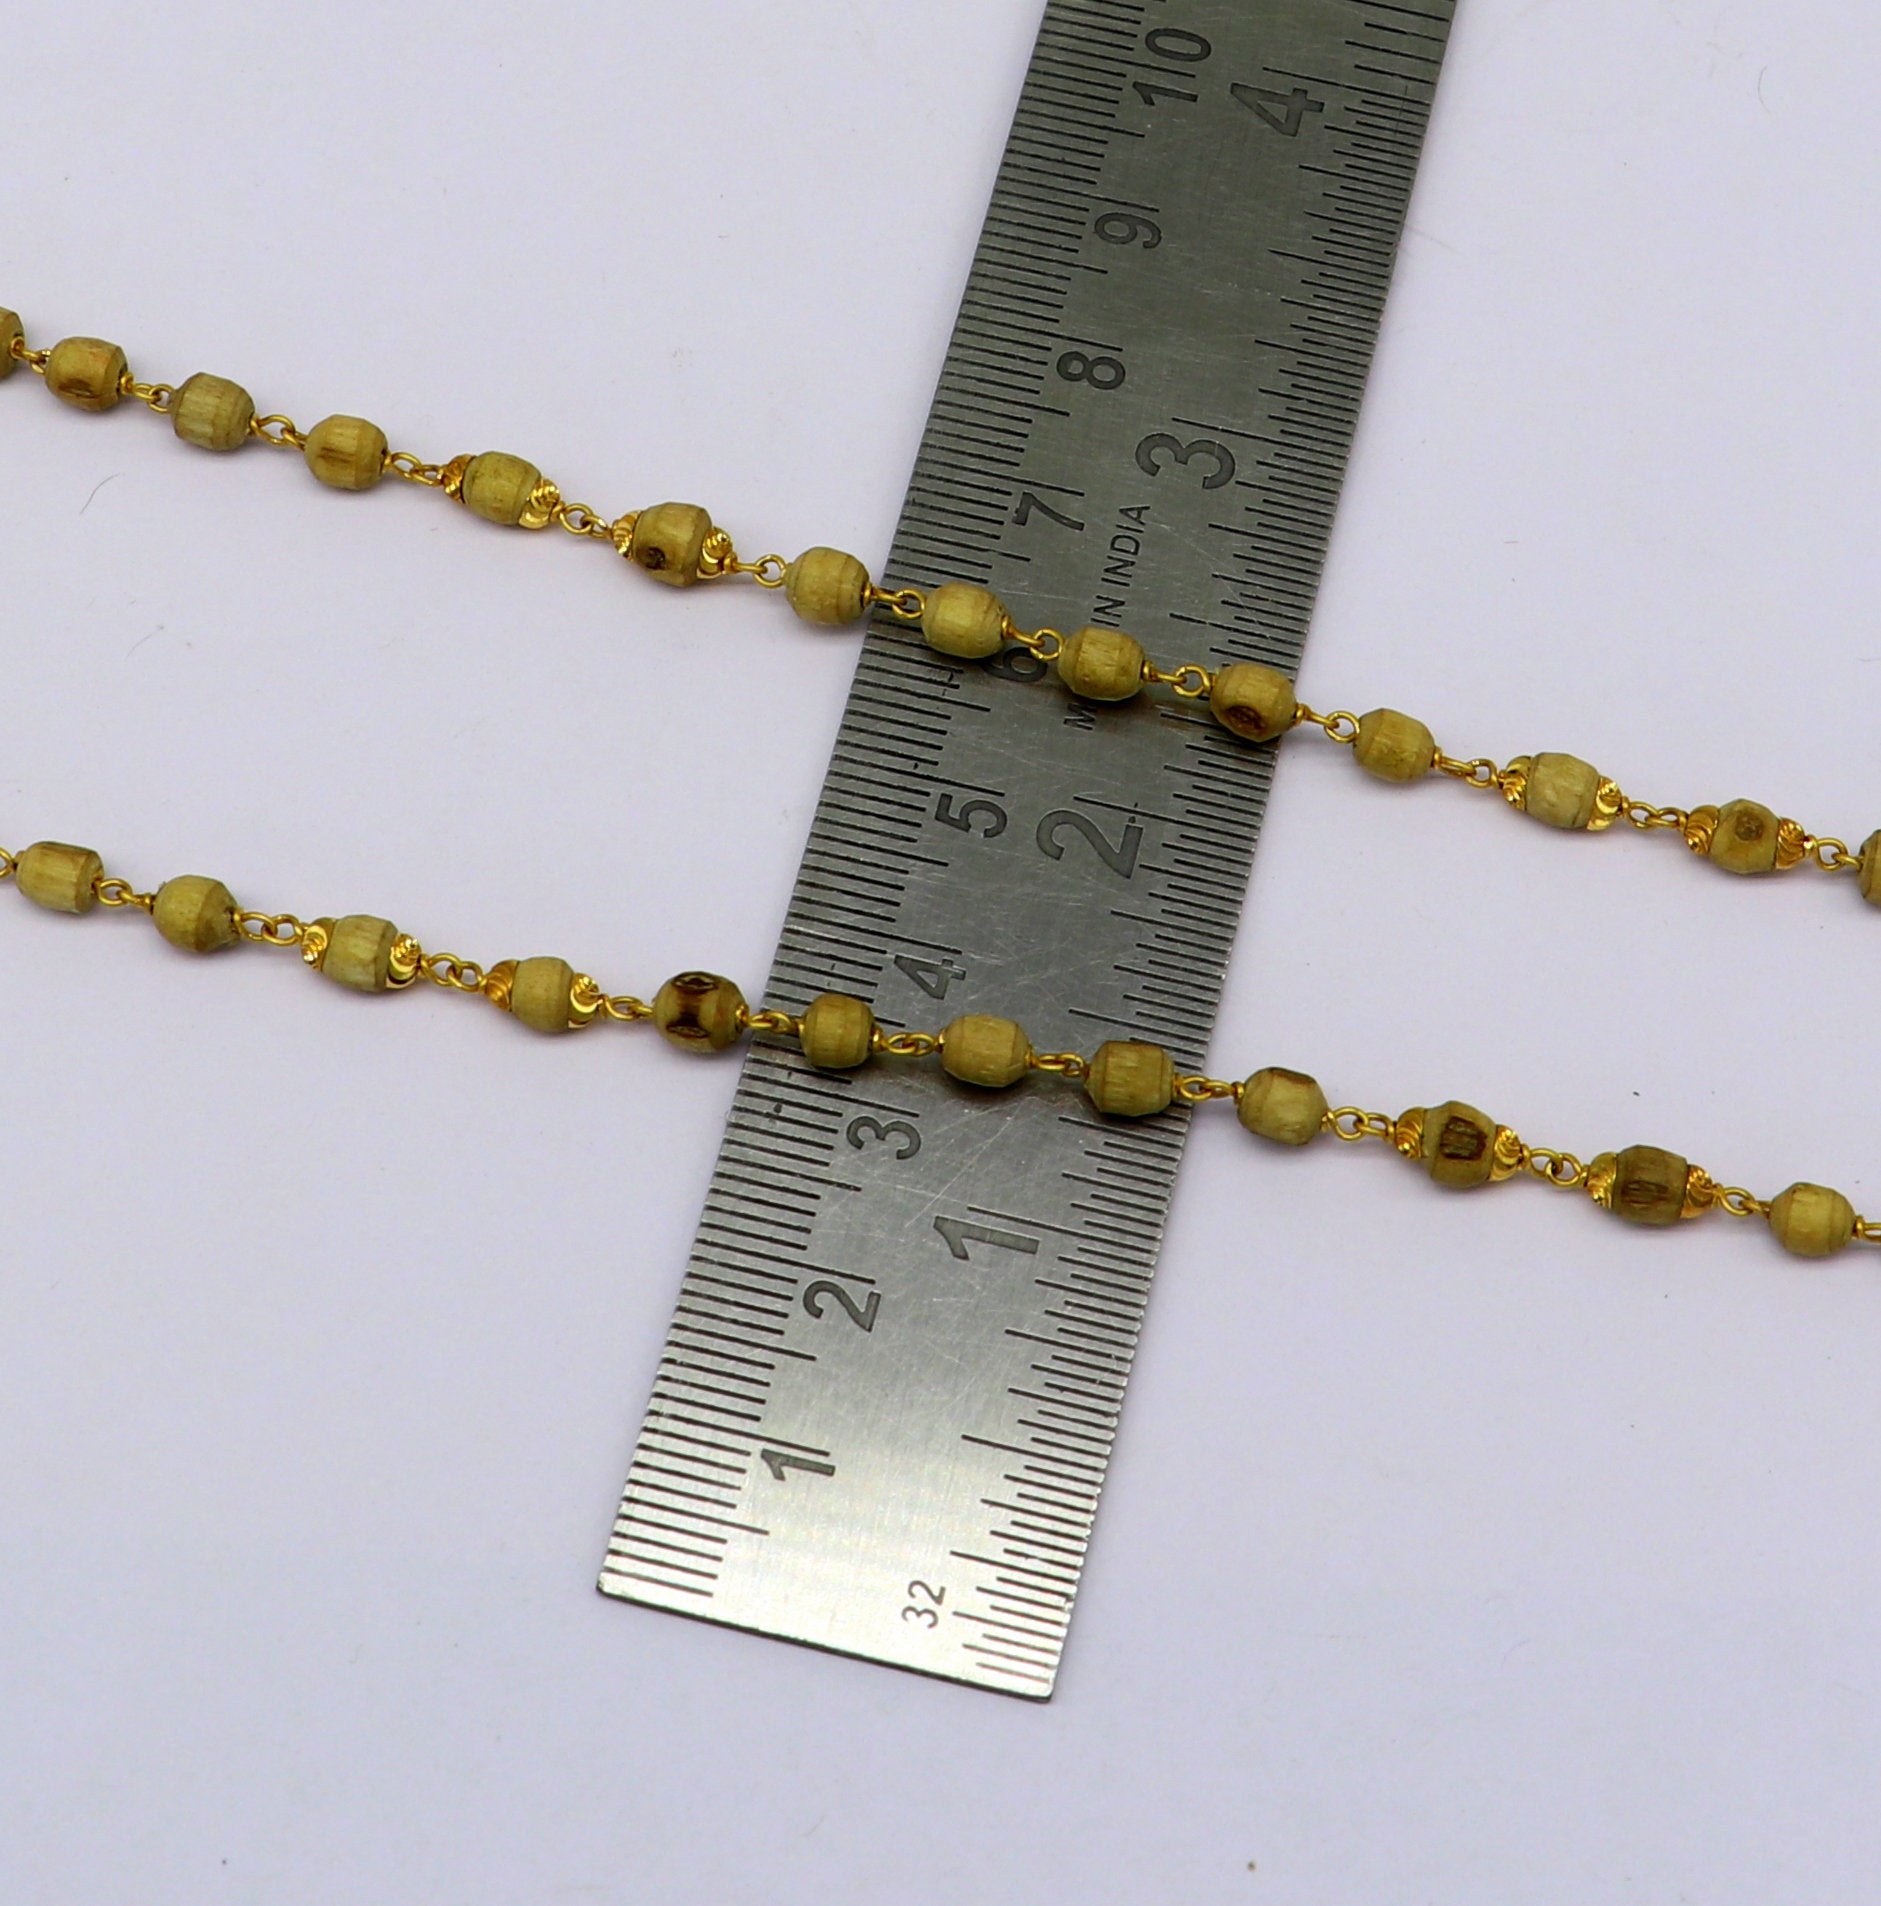 22kt yellow gold handmade customized basil rosary wooden beads chain necklace, gorgeous personalized tulsi chain, unisex stylish gifting - TRIBAL ORNAMENTS